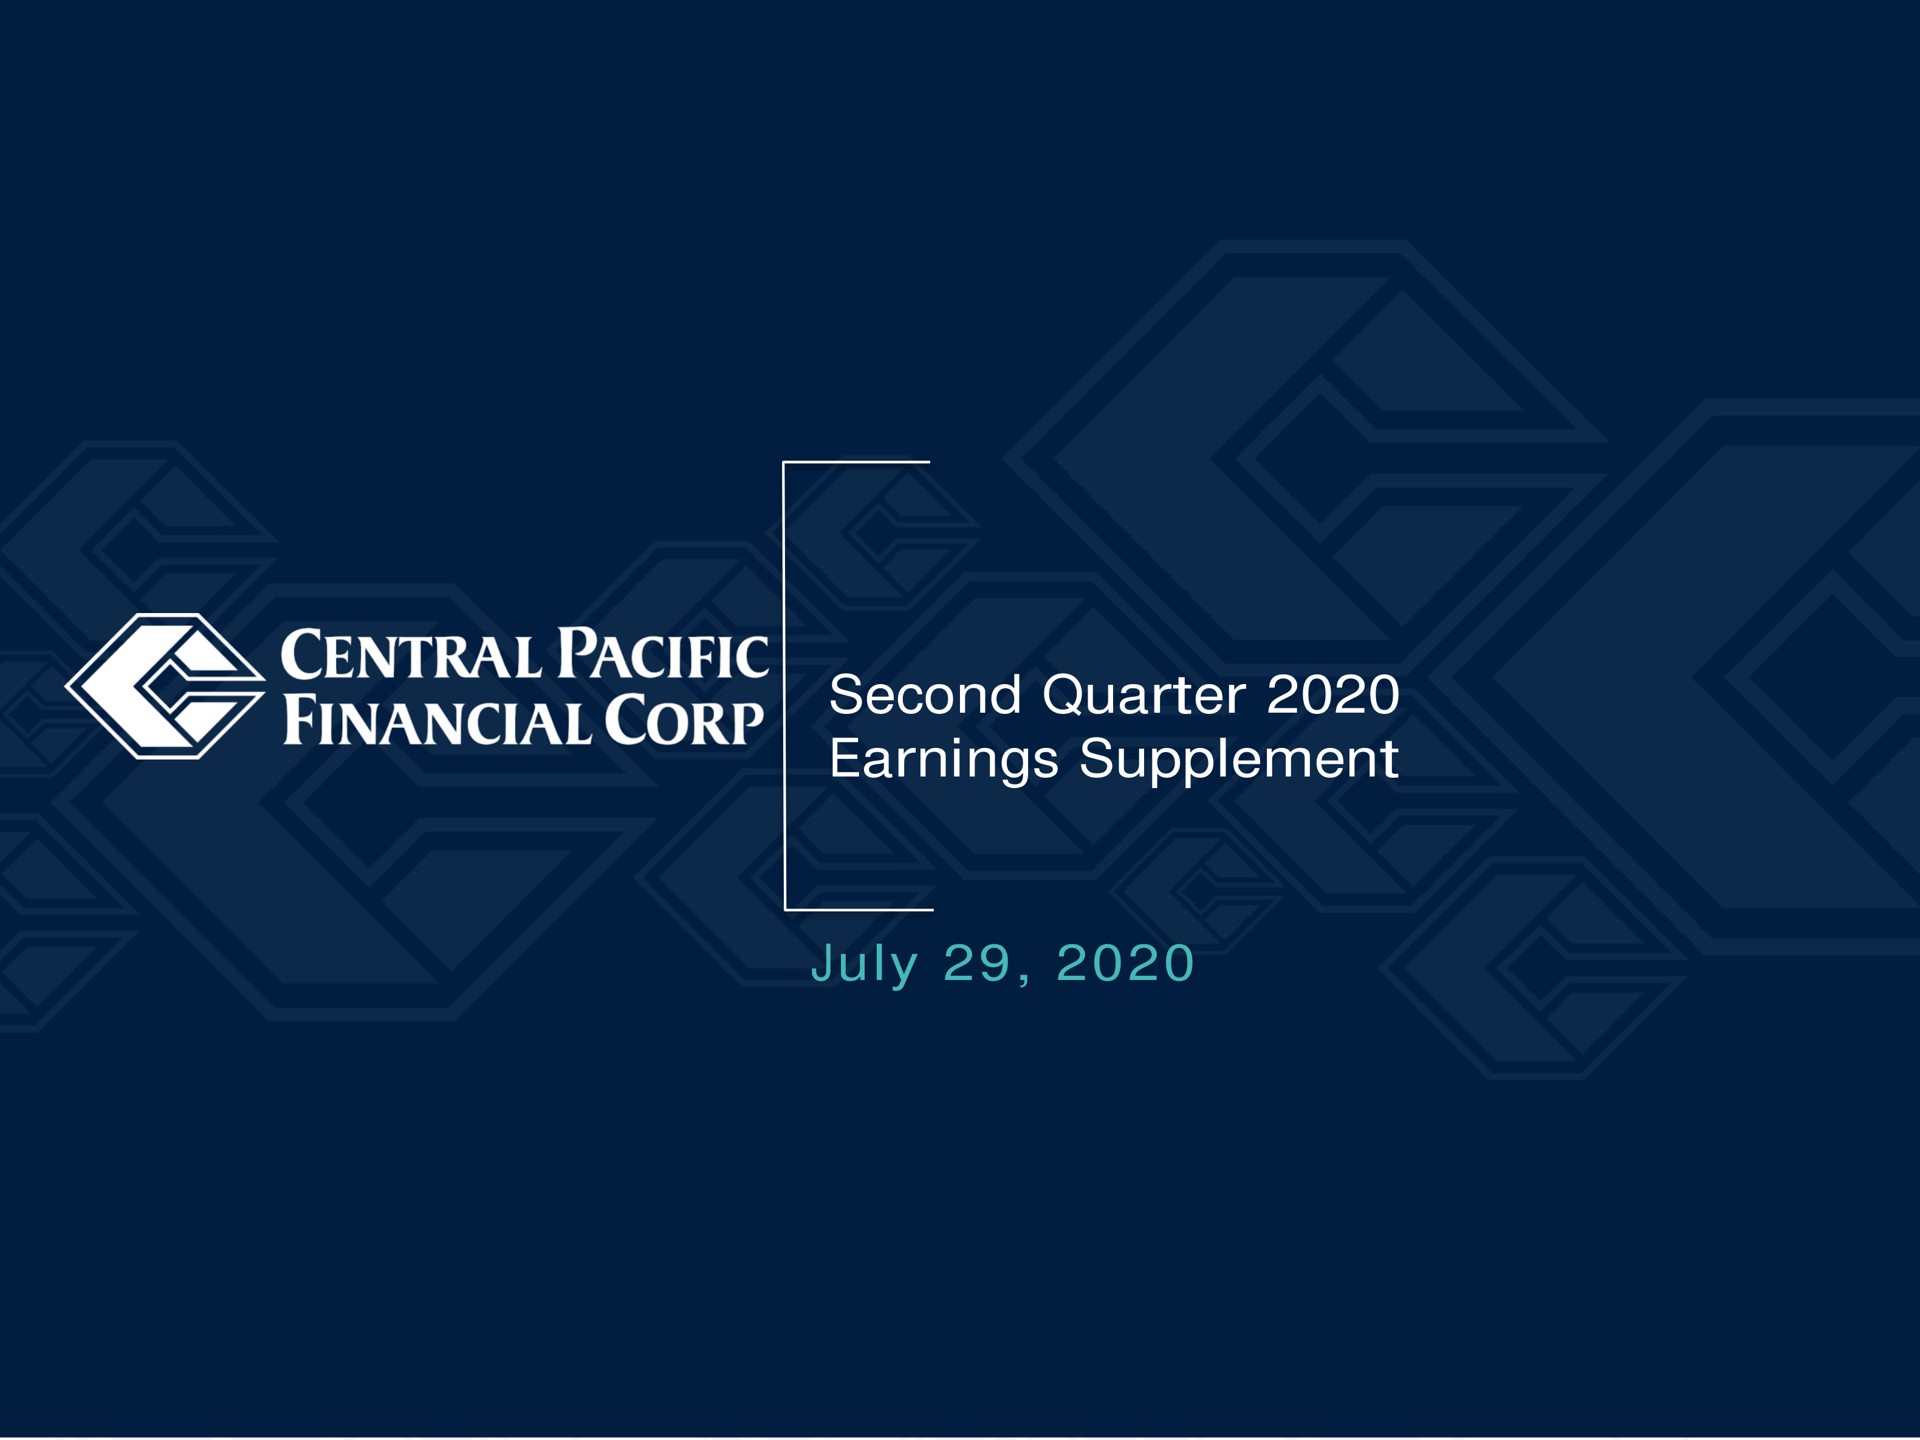 a second quarter earnings supplement central pacific financial corp | Central Pacific Financial